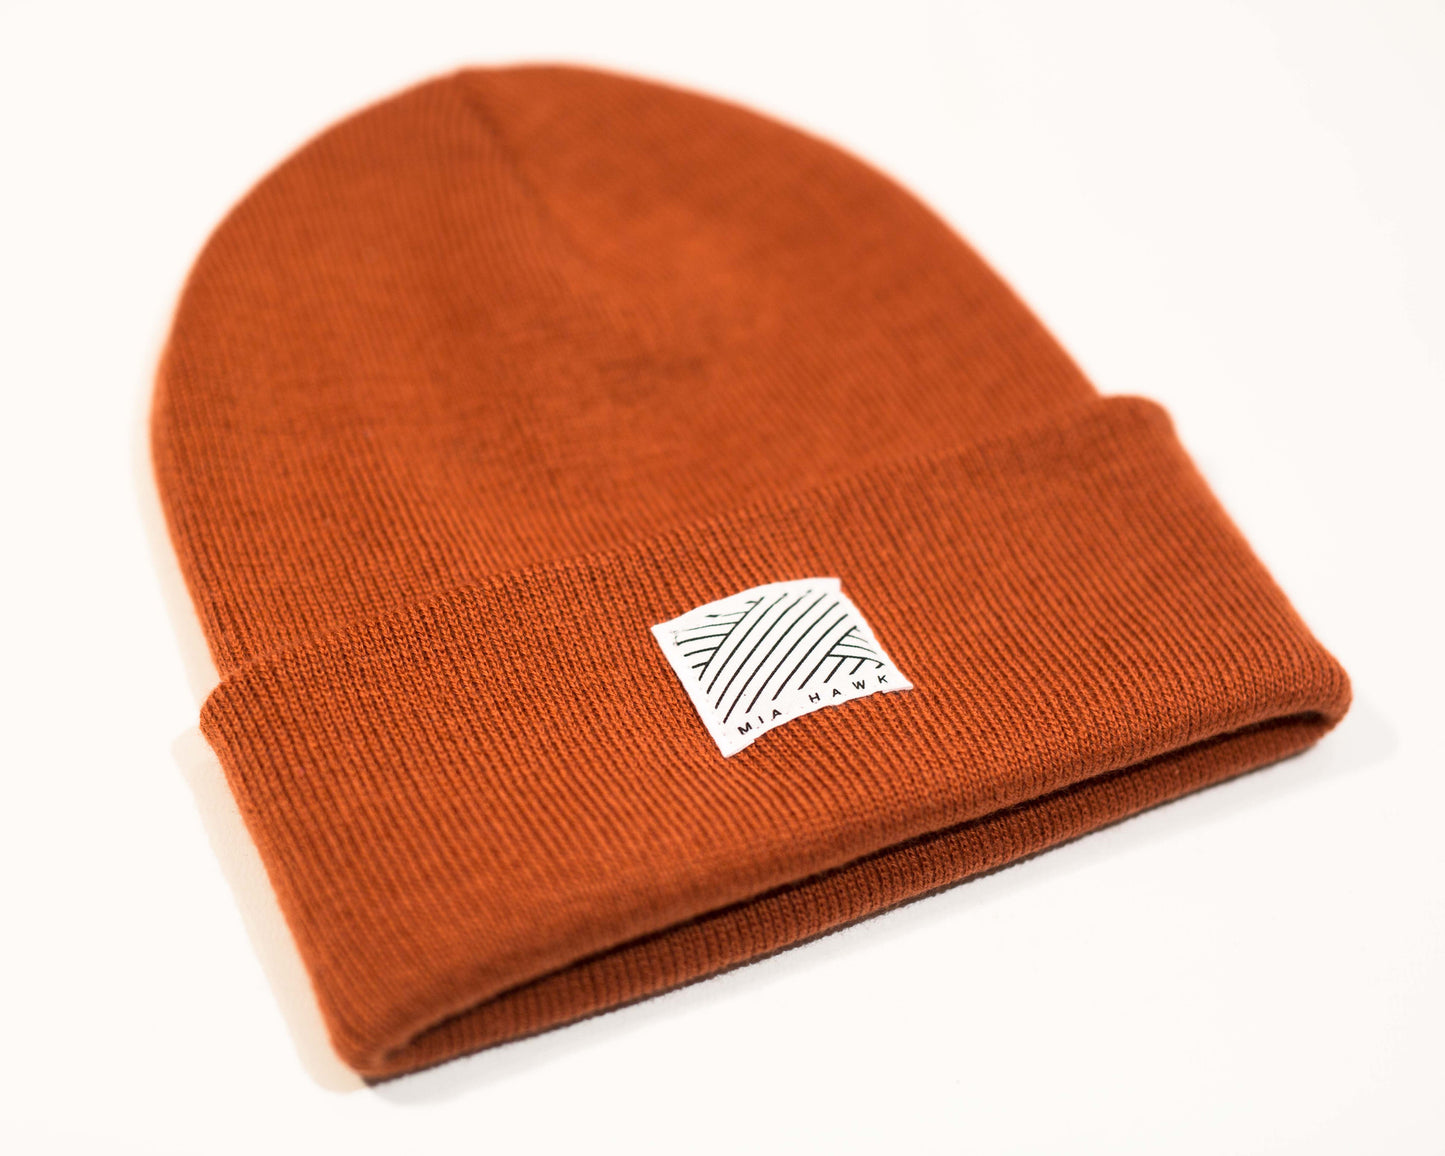 Intertwined Rust Red Beanie